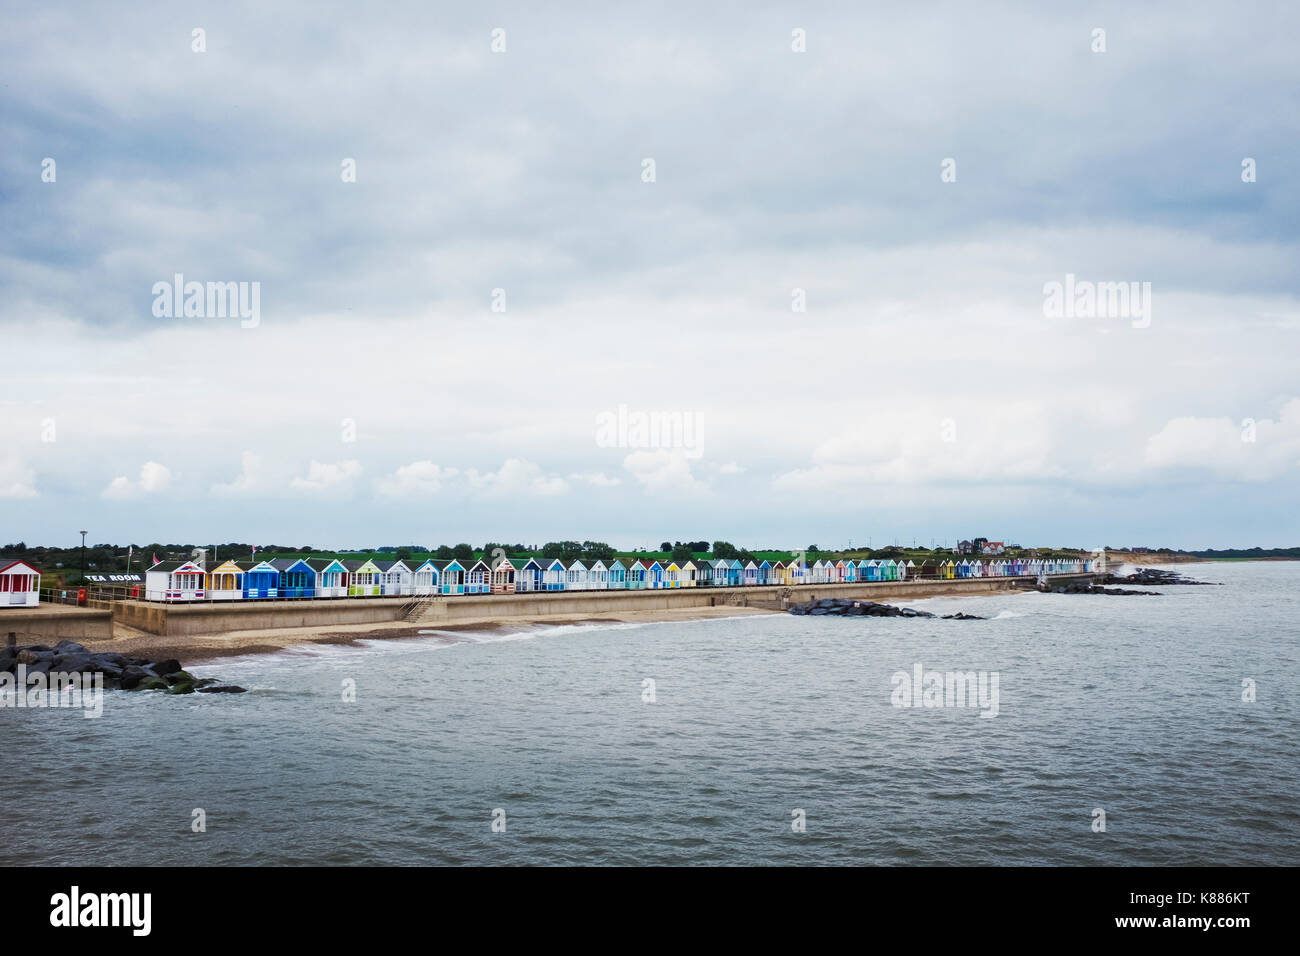 Long row of painted beach huts on a sandy beach overlooking the water. Stock Photo